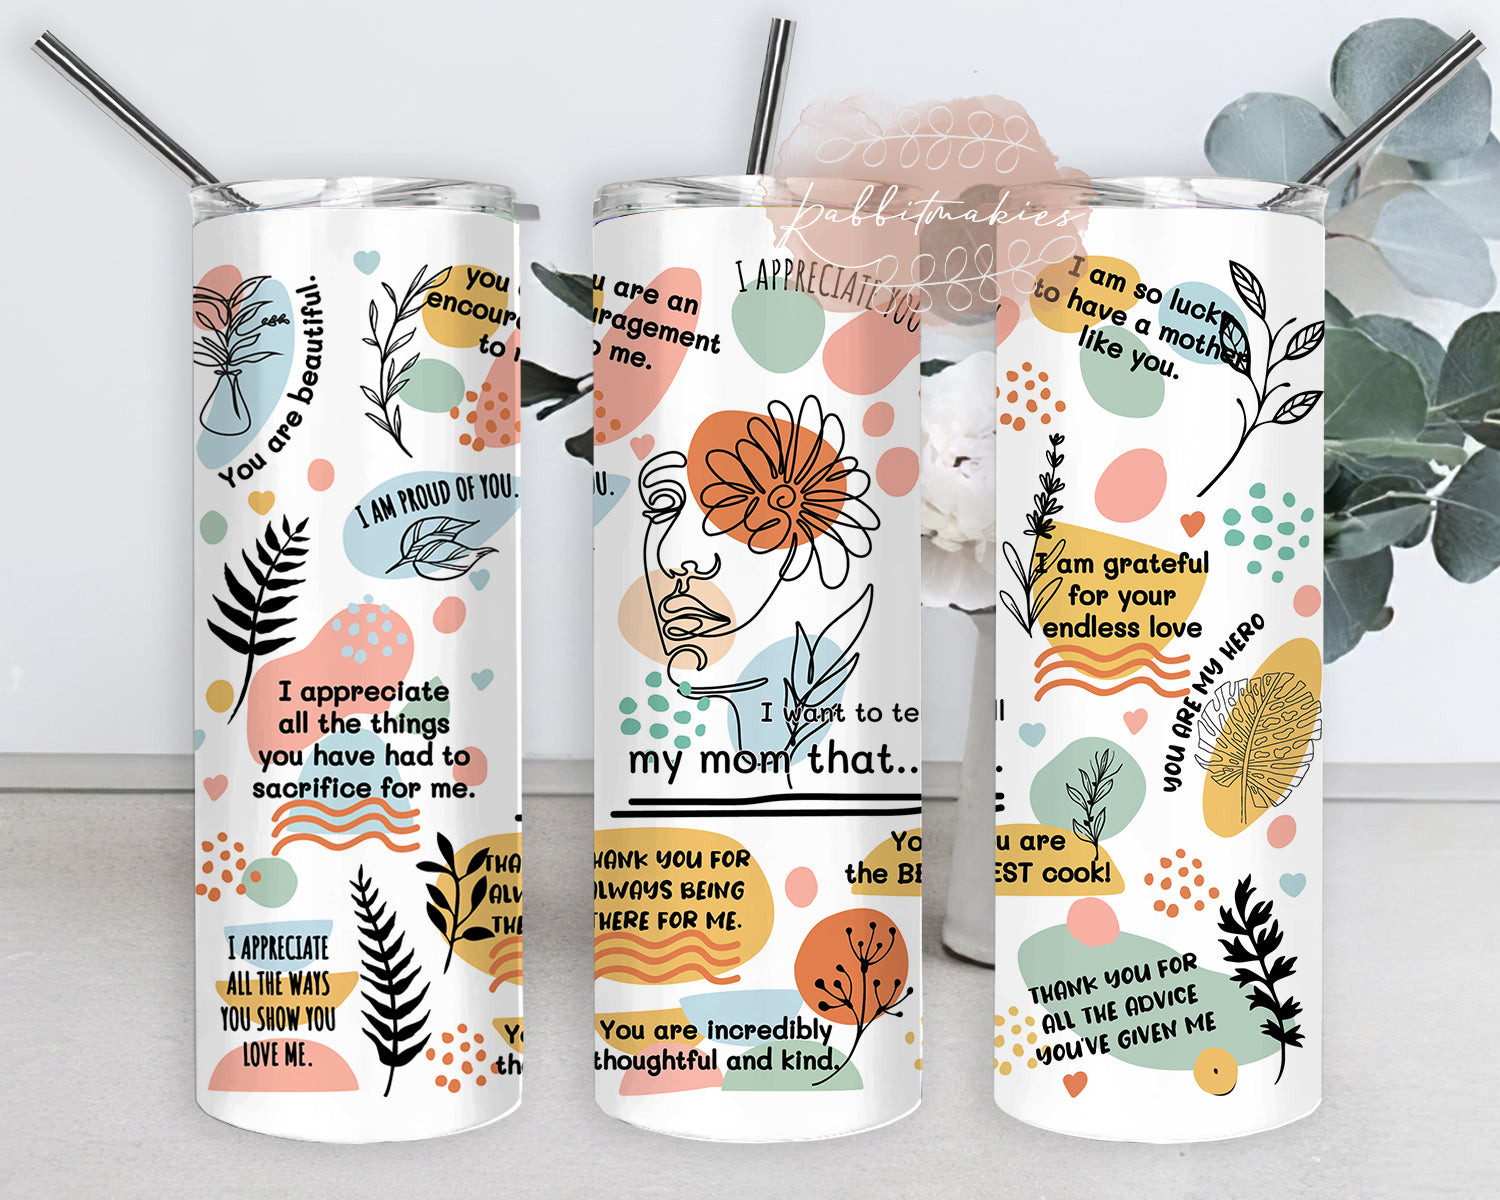 My Daily Workout Affirmations Tumbler 20oz - Positive Gifts